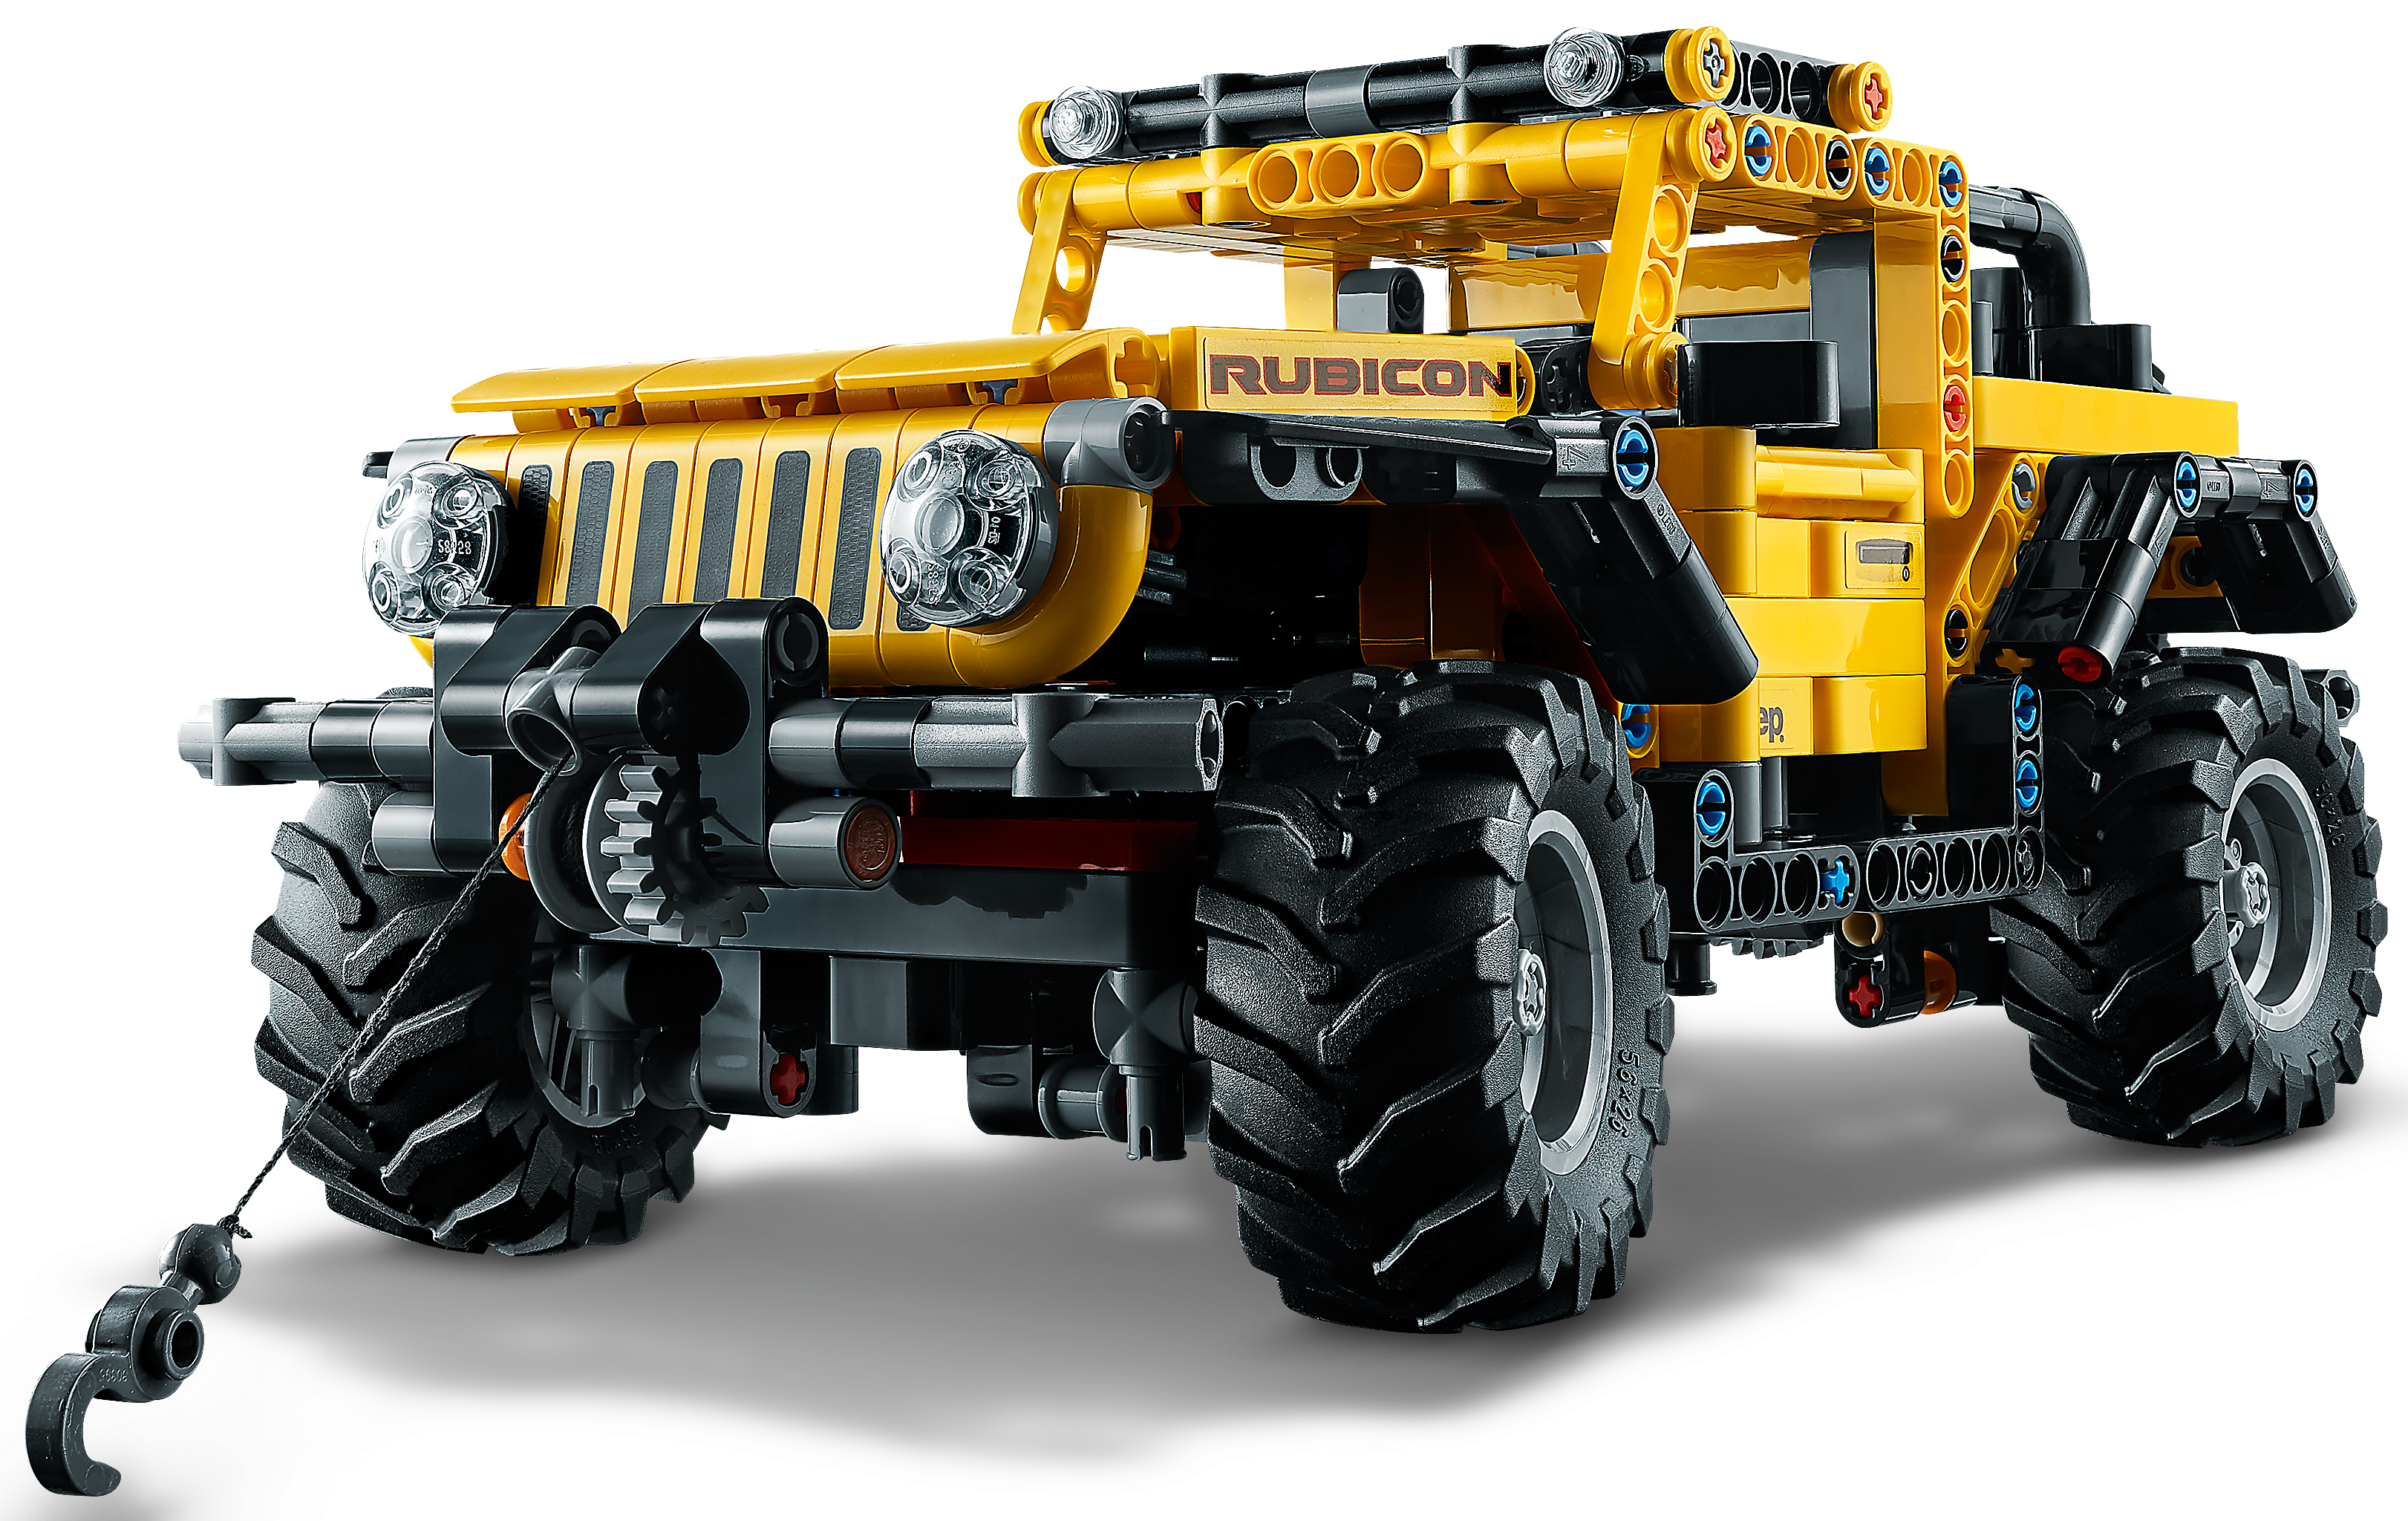 strand maagd tempo Jeep® Wrangler 42122 | Technic™ | Buy online at the Official LEGO® Shop US